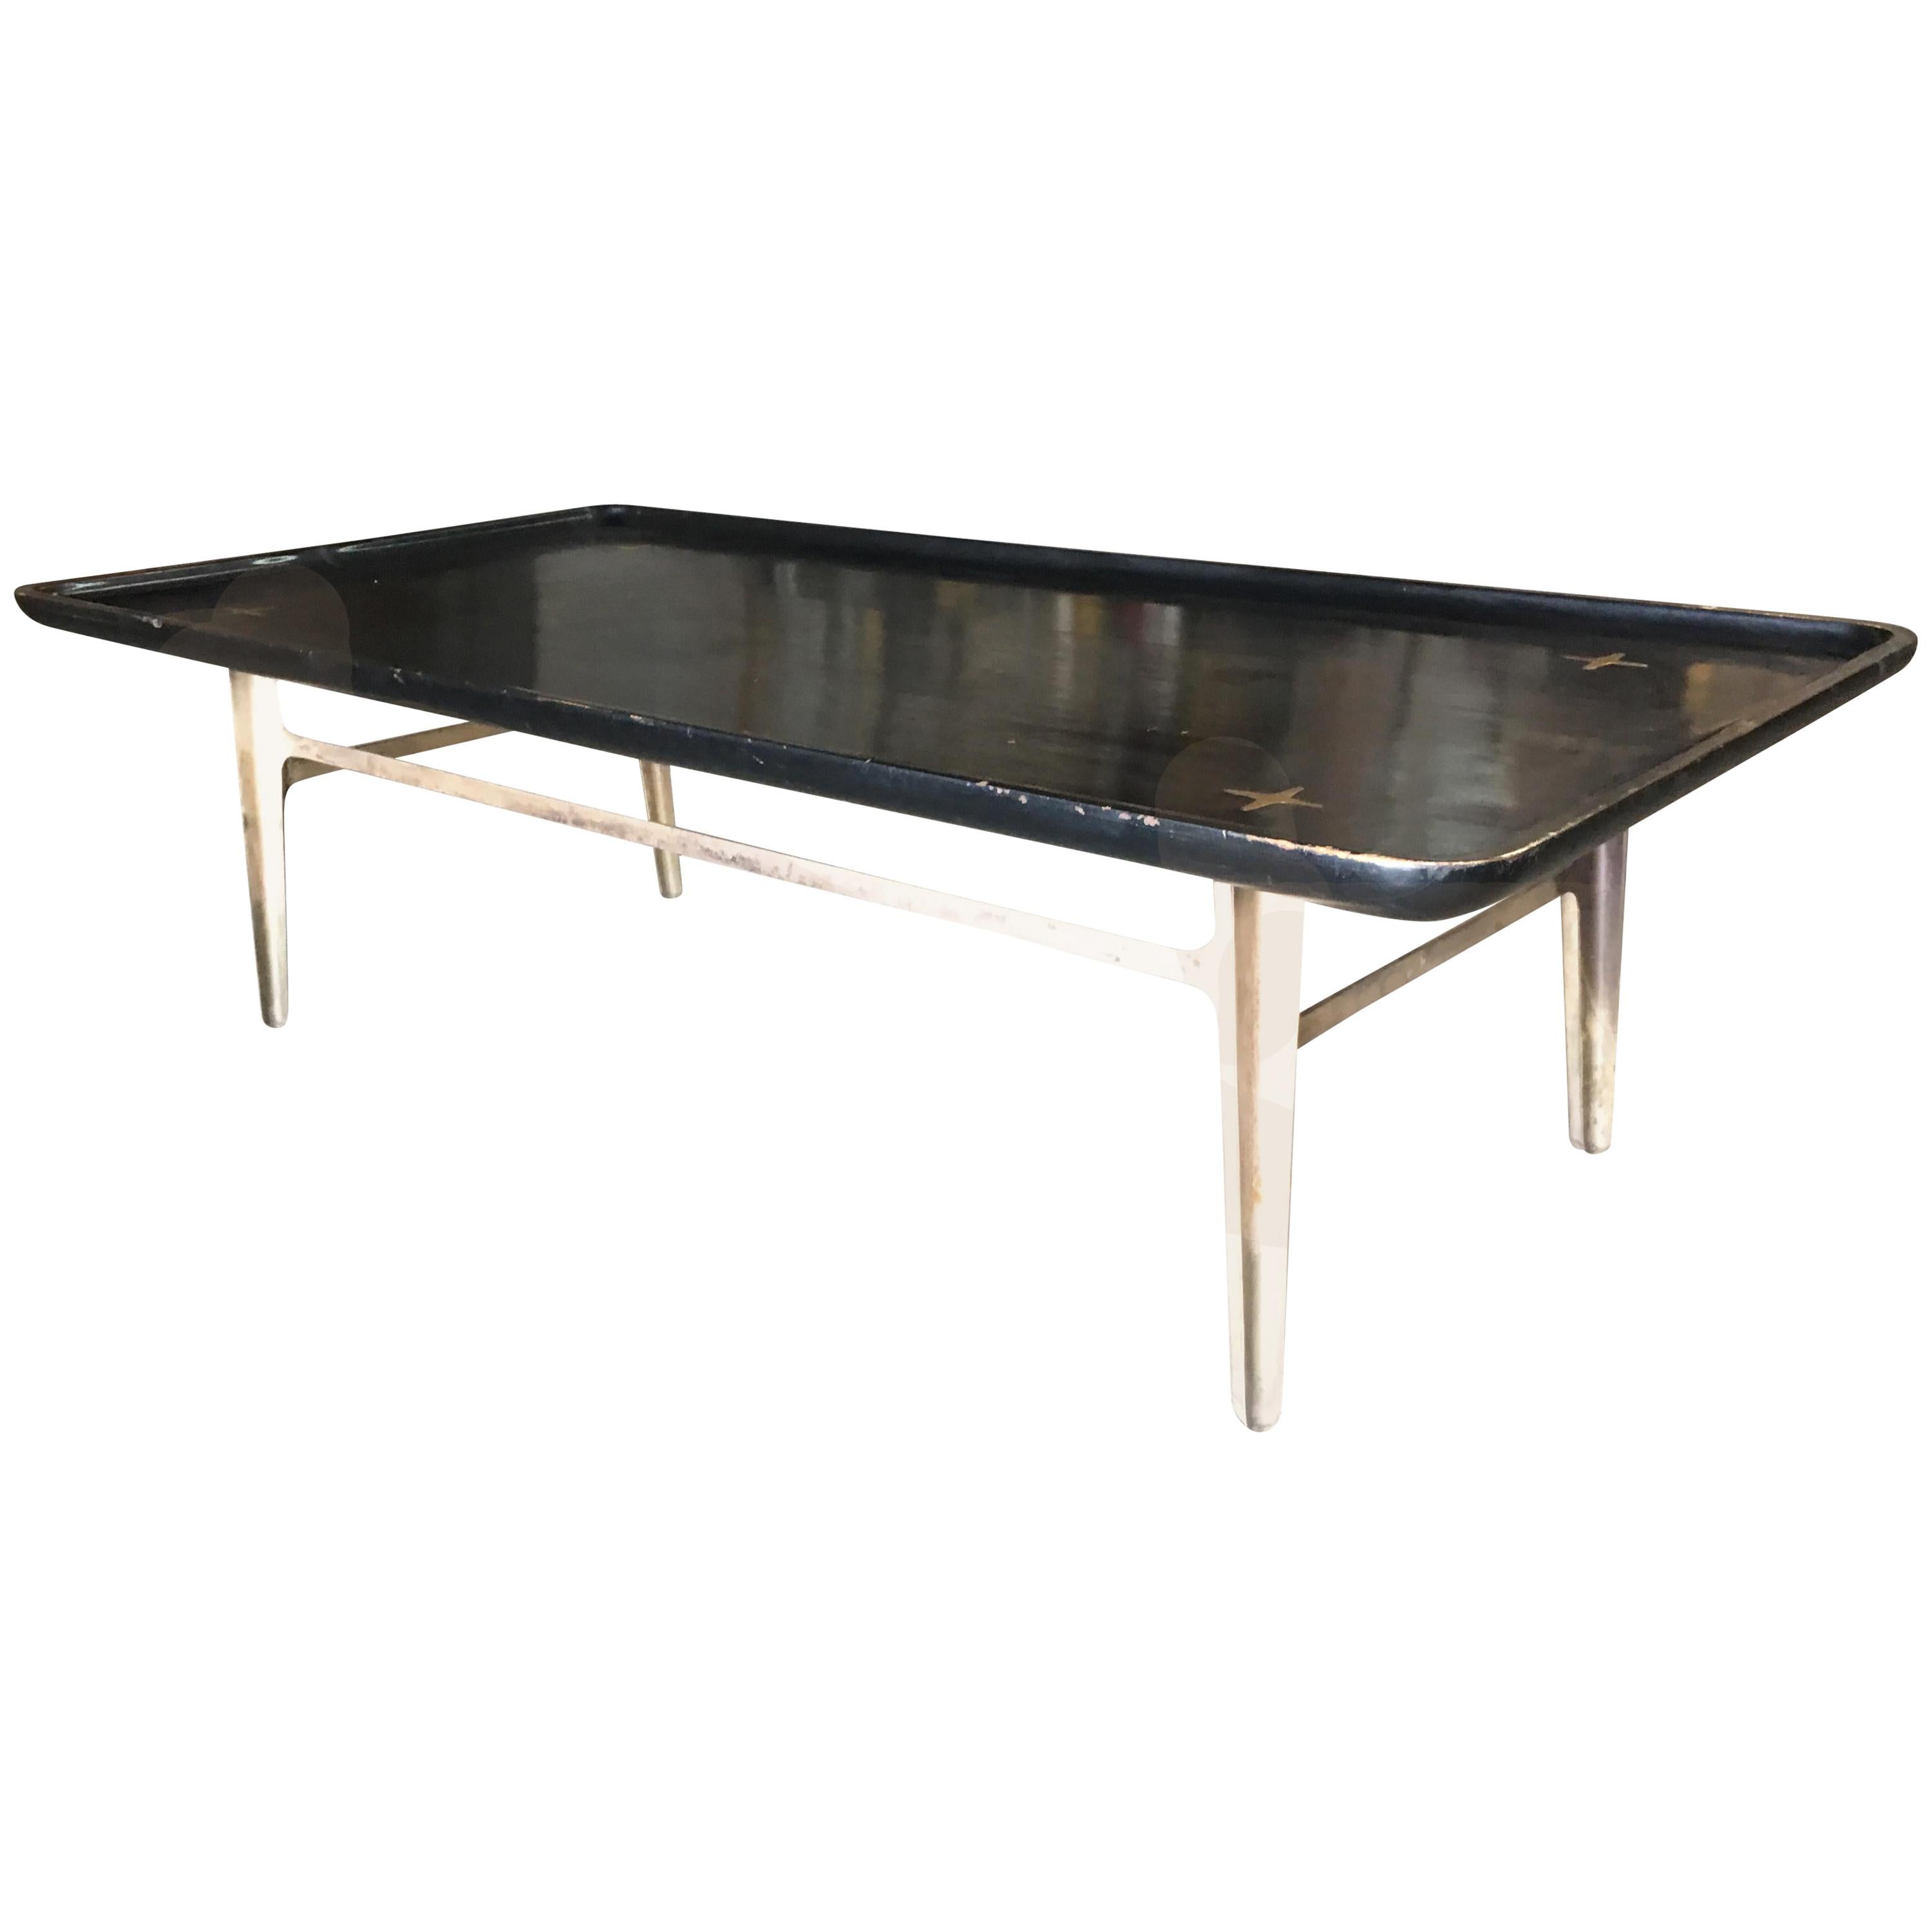 Rare Midcentury Black Lacquer Coffee Table with Solid Cast Bronze Base For Sale